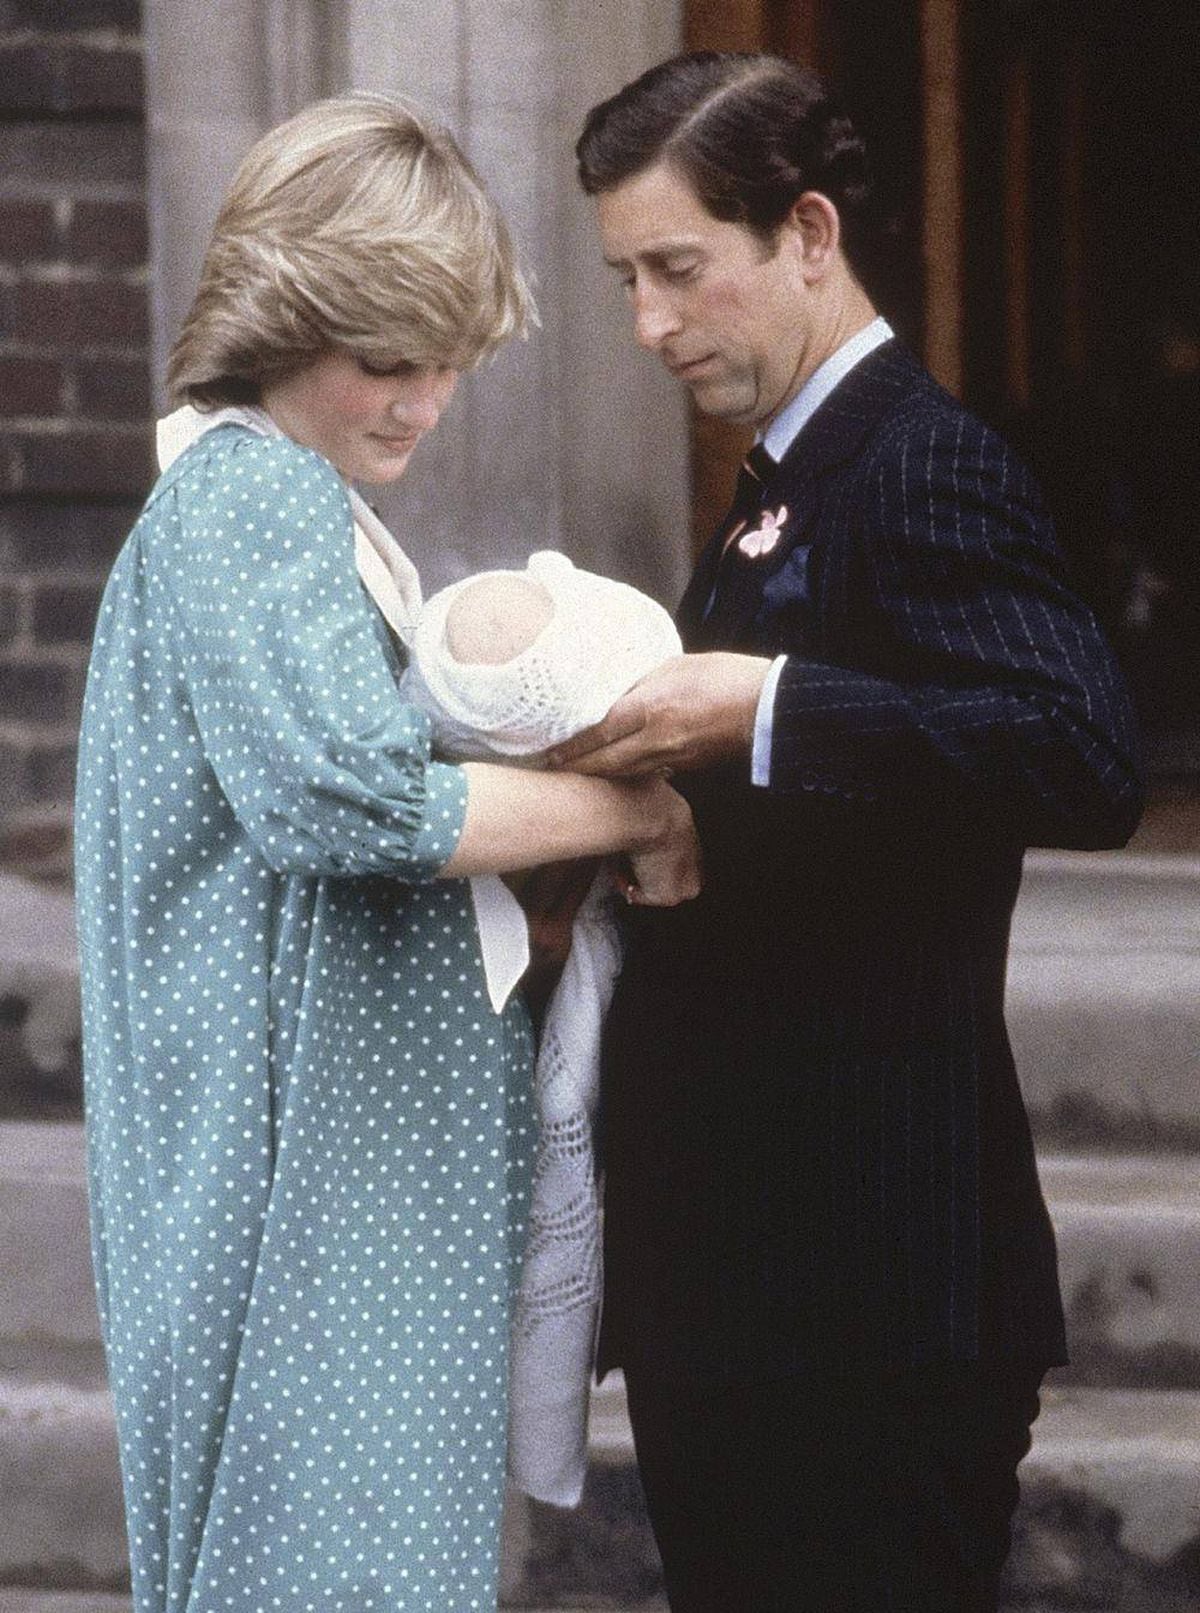 A look back: Diana and Charles with young Will and Harry - The Globe ...